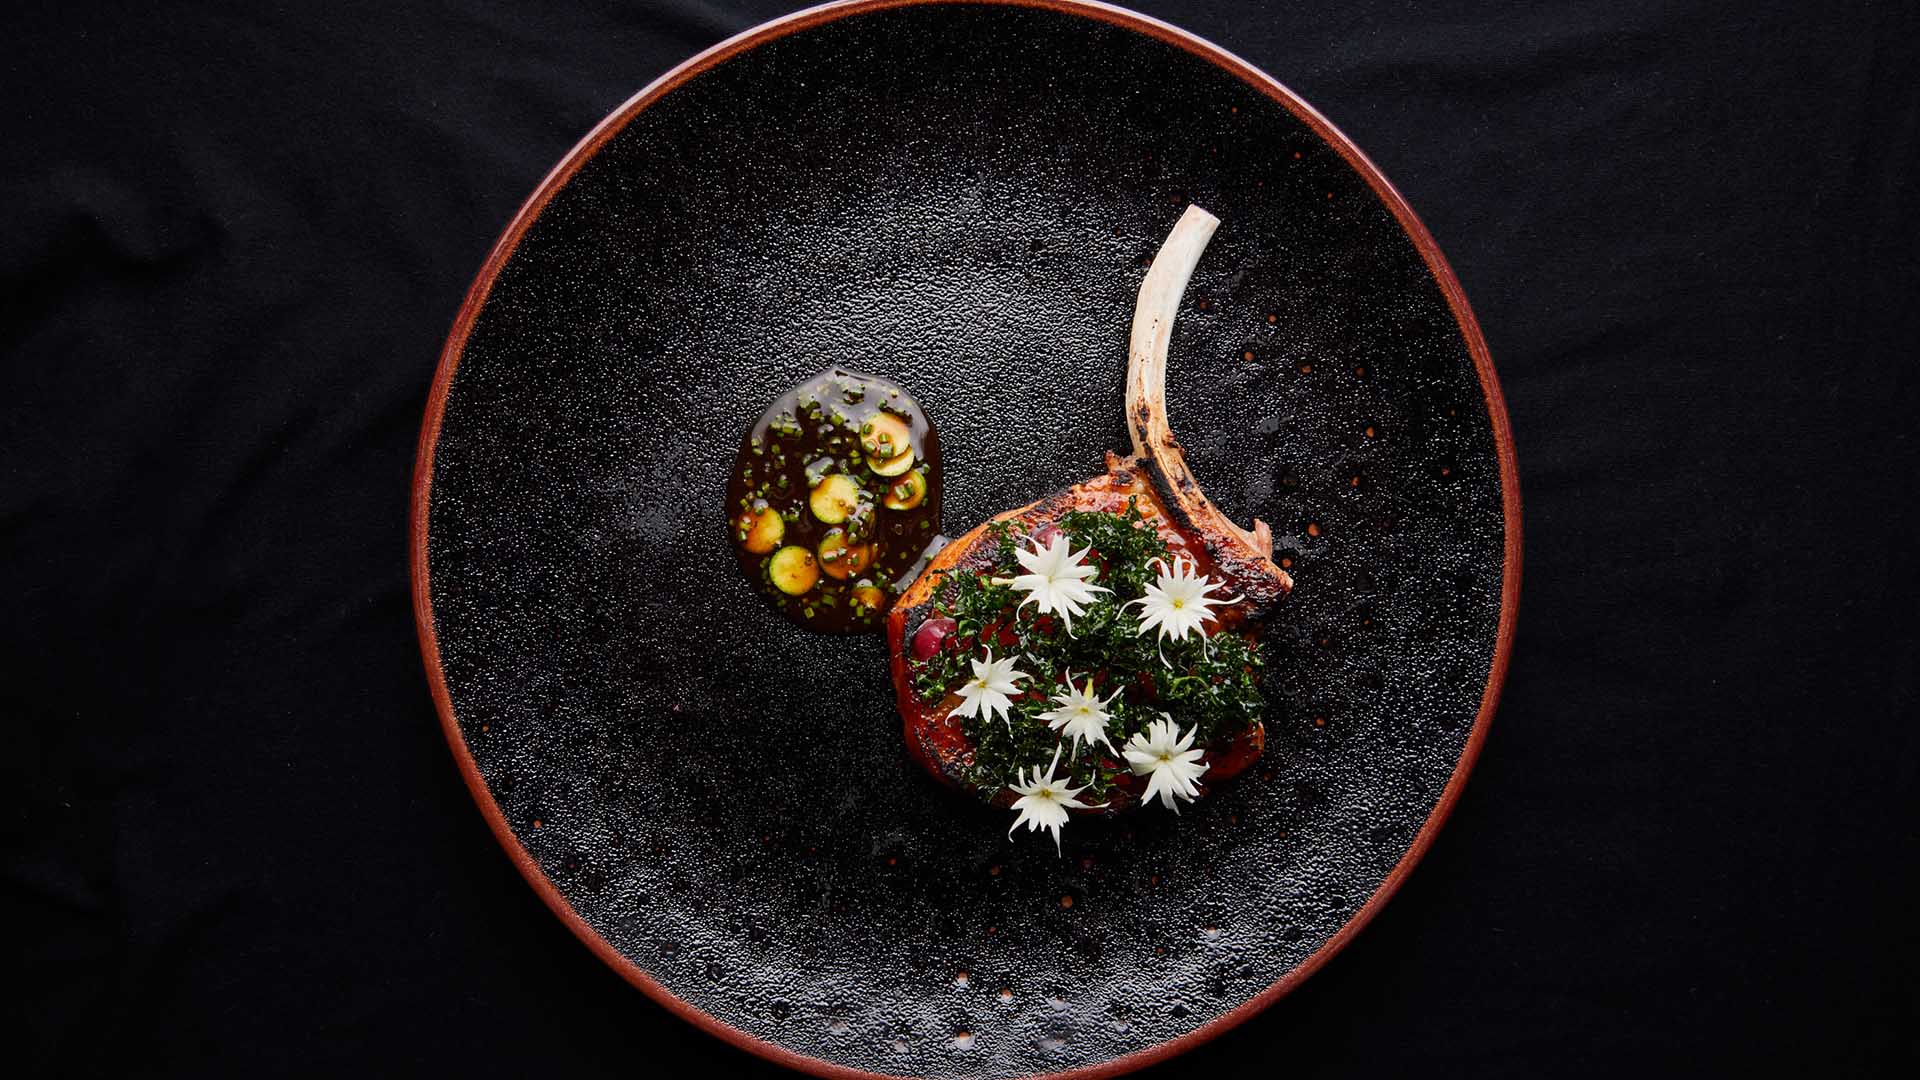 NEL Is Kicking Off 2023 with Its First 11-Course Degustation Devoted to Native Australian Ingredients